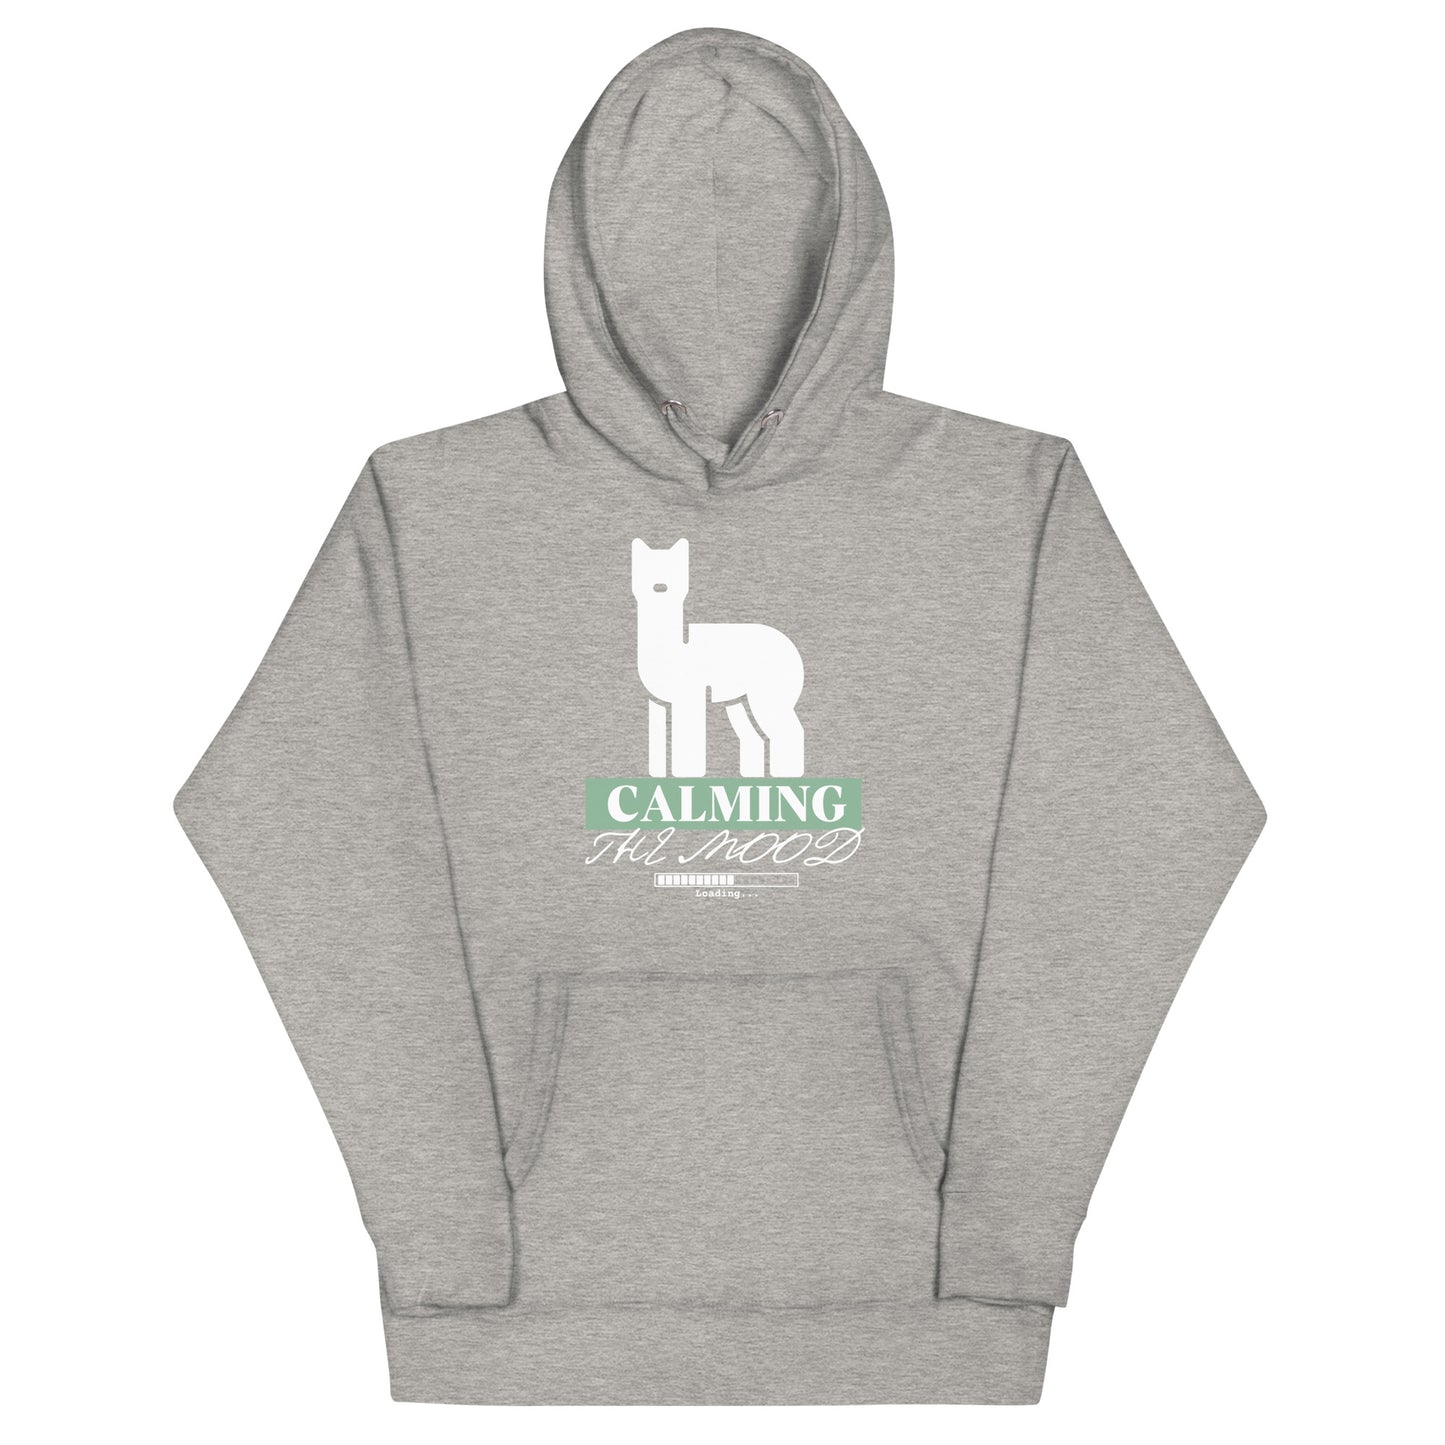 Calming The Mood 100% Cotton Face Unisex Hoodie